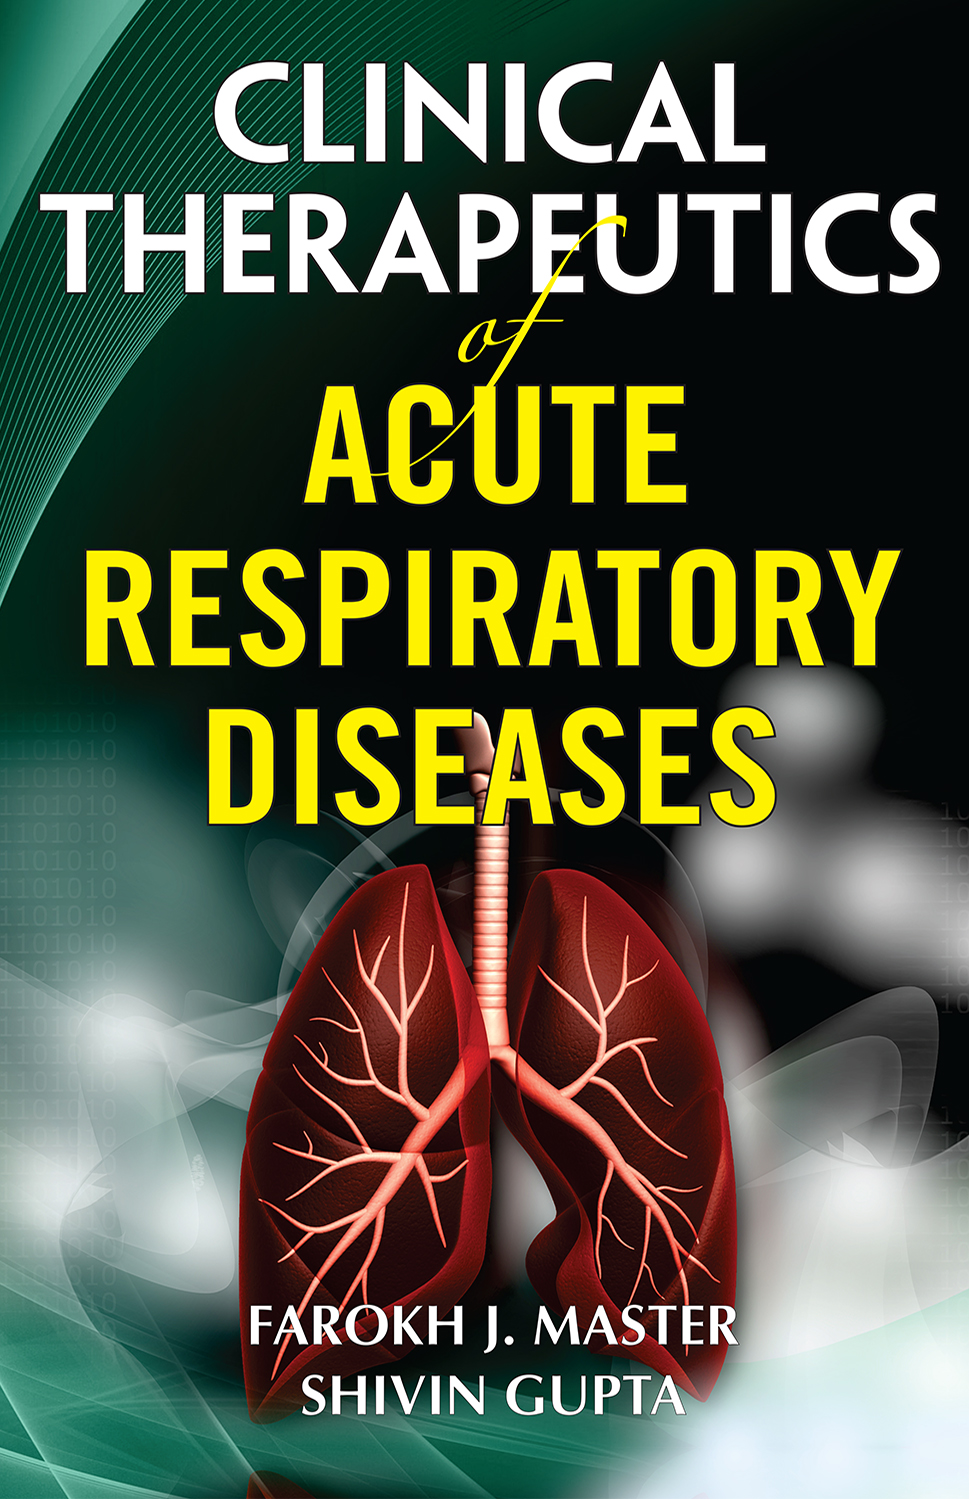 Clinical Therapeutics Of Acute Respiratory Diseases